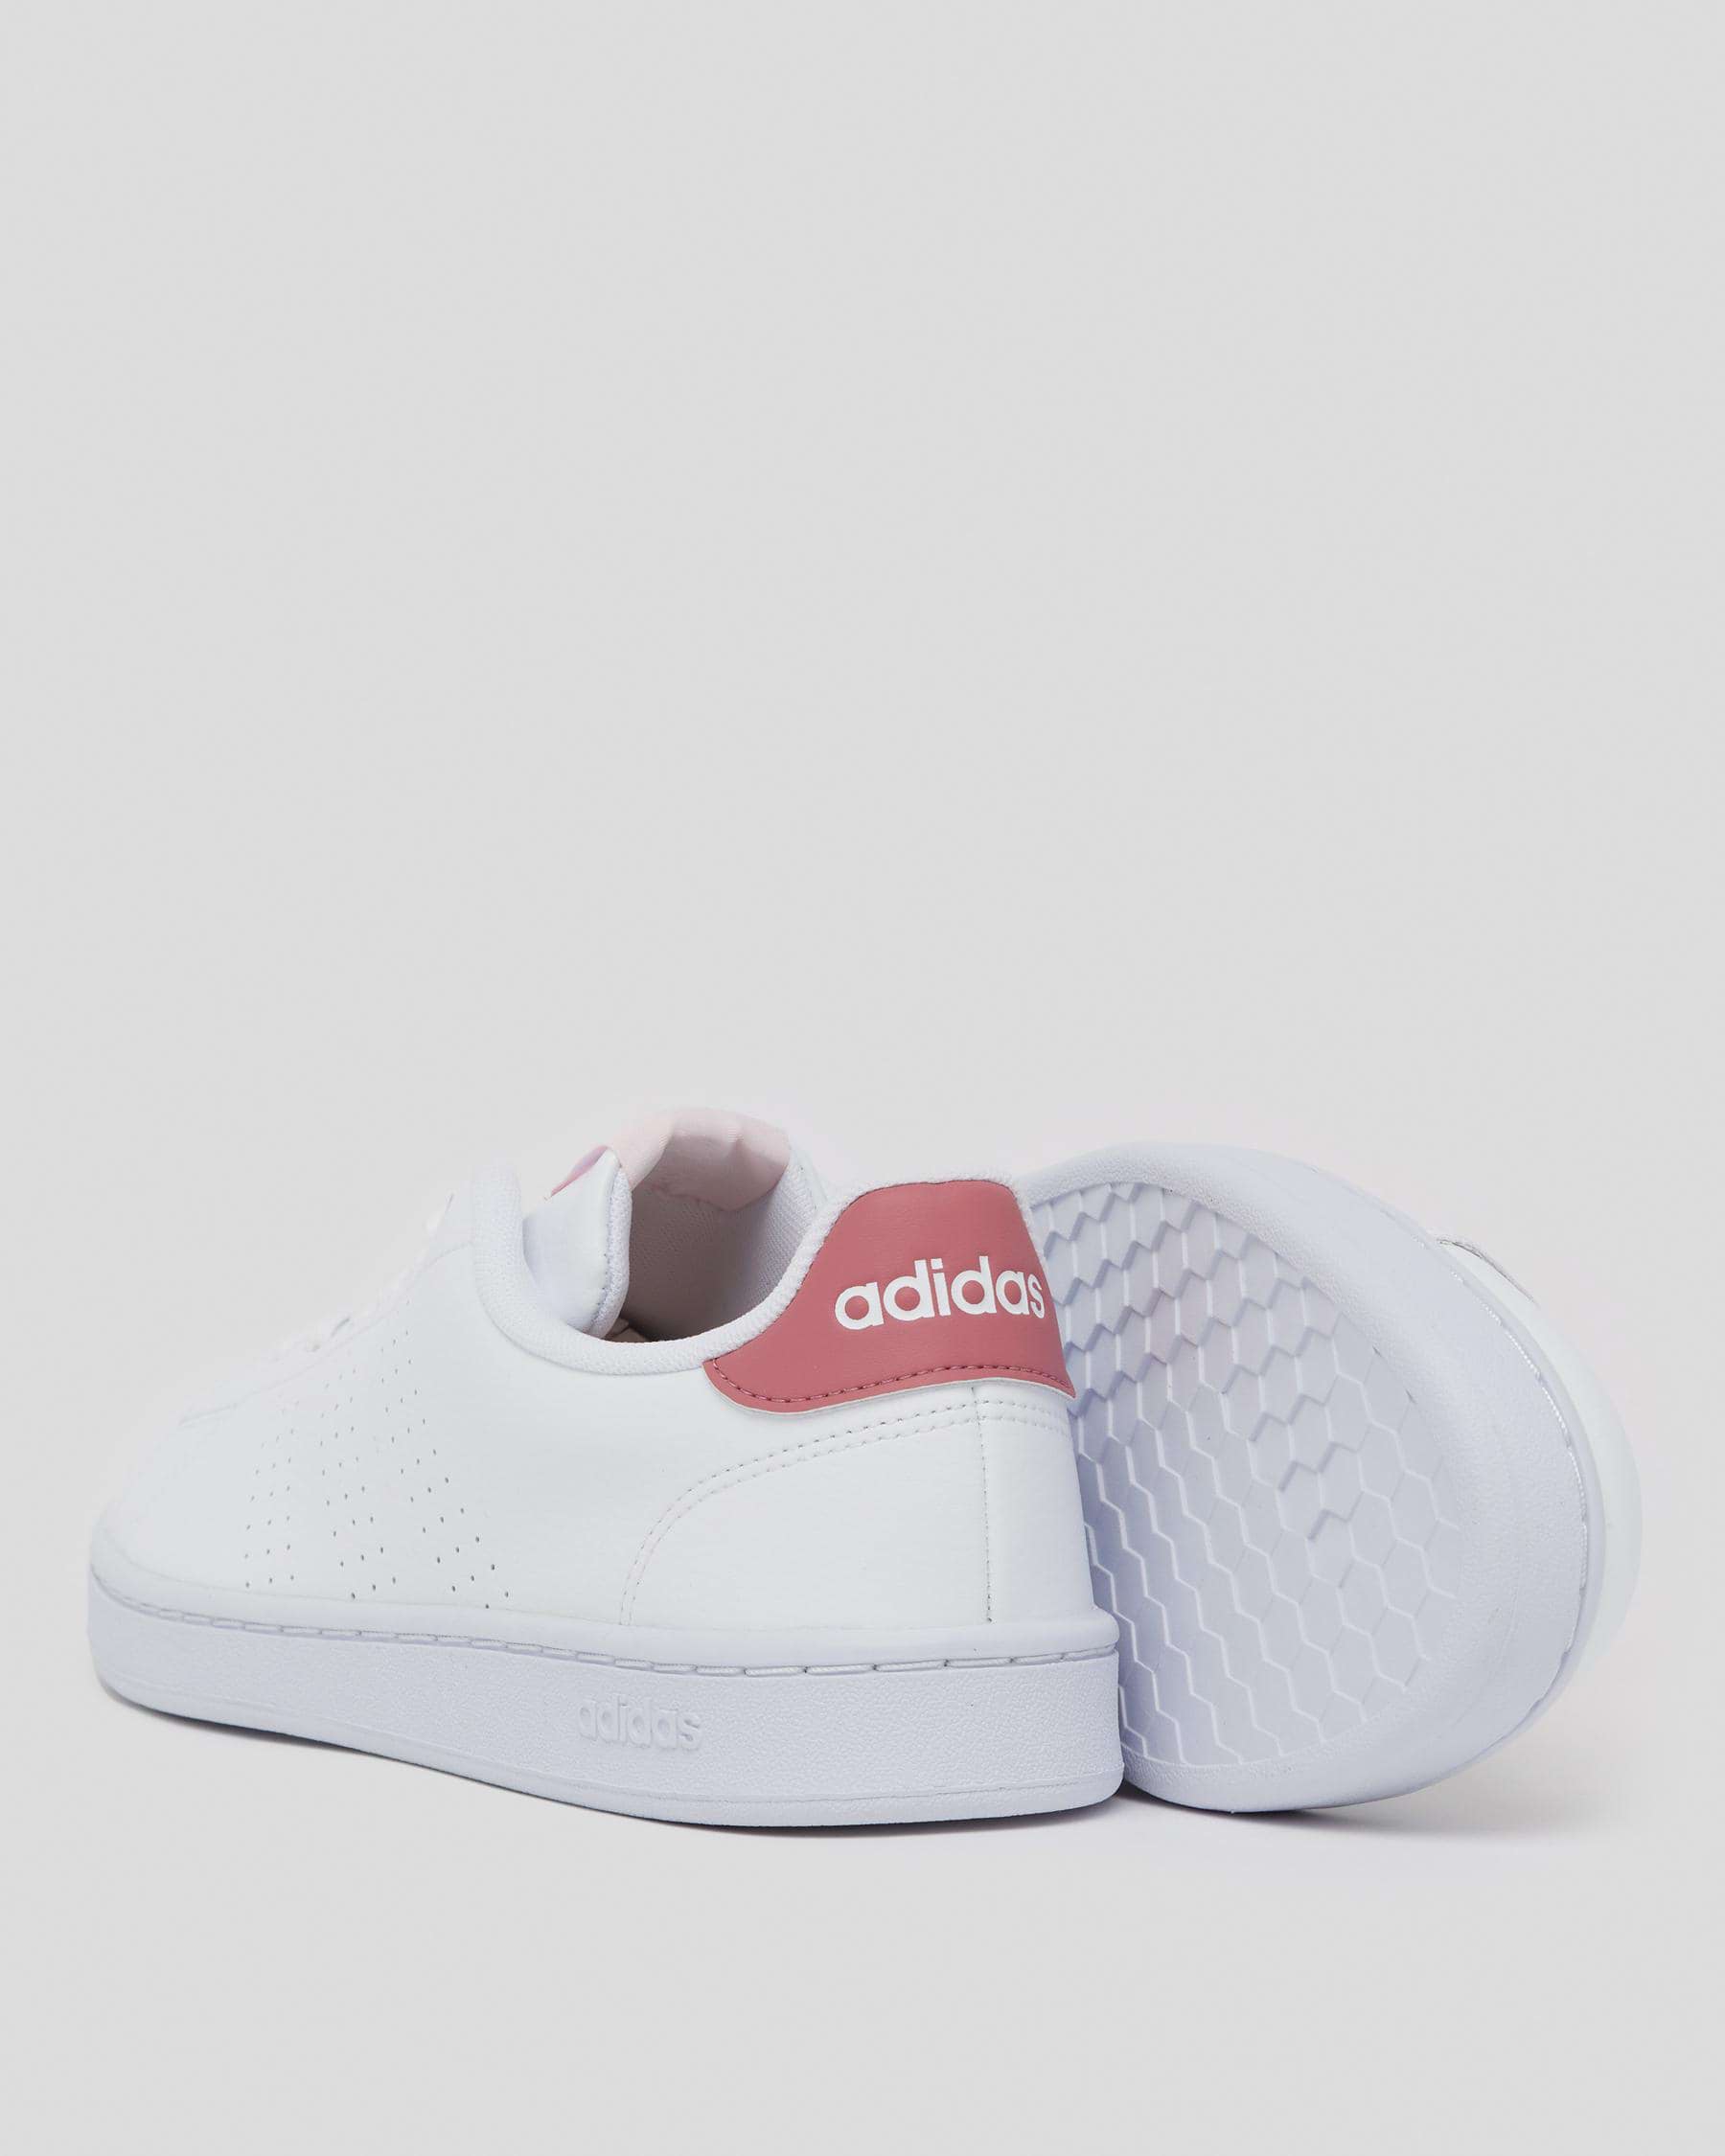 Adidas Womens Advantage Shoes In Ftwr White/ftwr White/pink - Fast ...